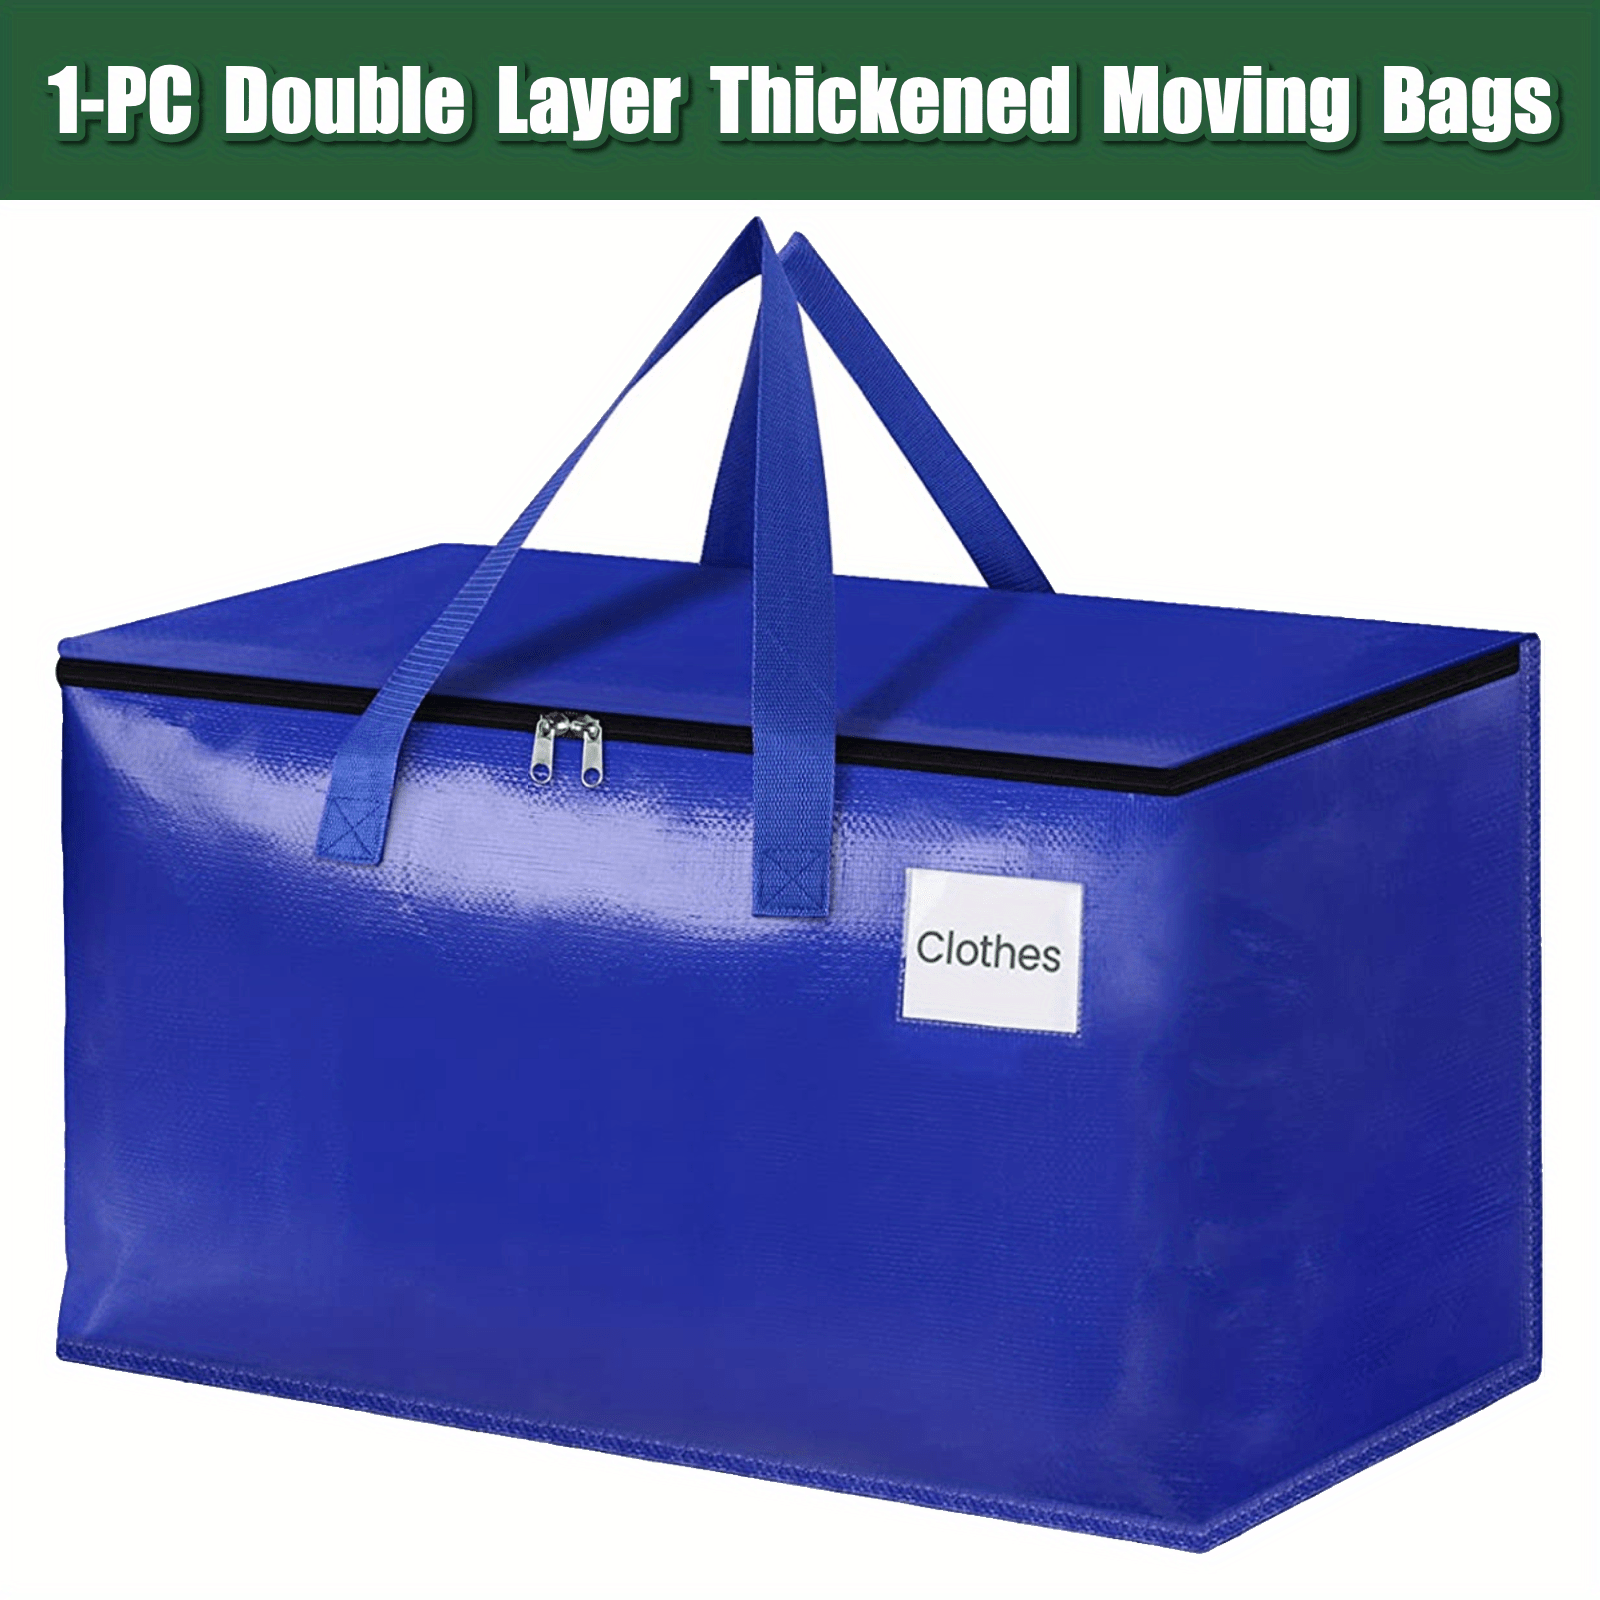 Extra Large Storage Bags Heavy Duty Moving Bags,totes Clothes